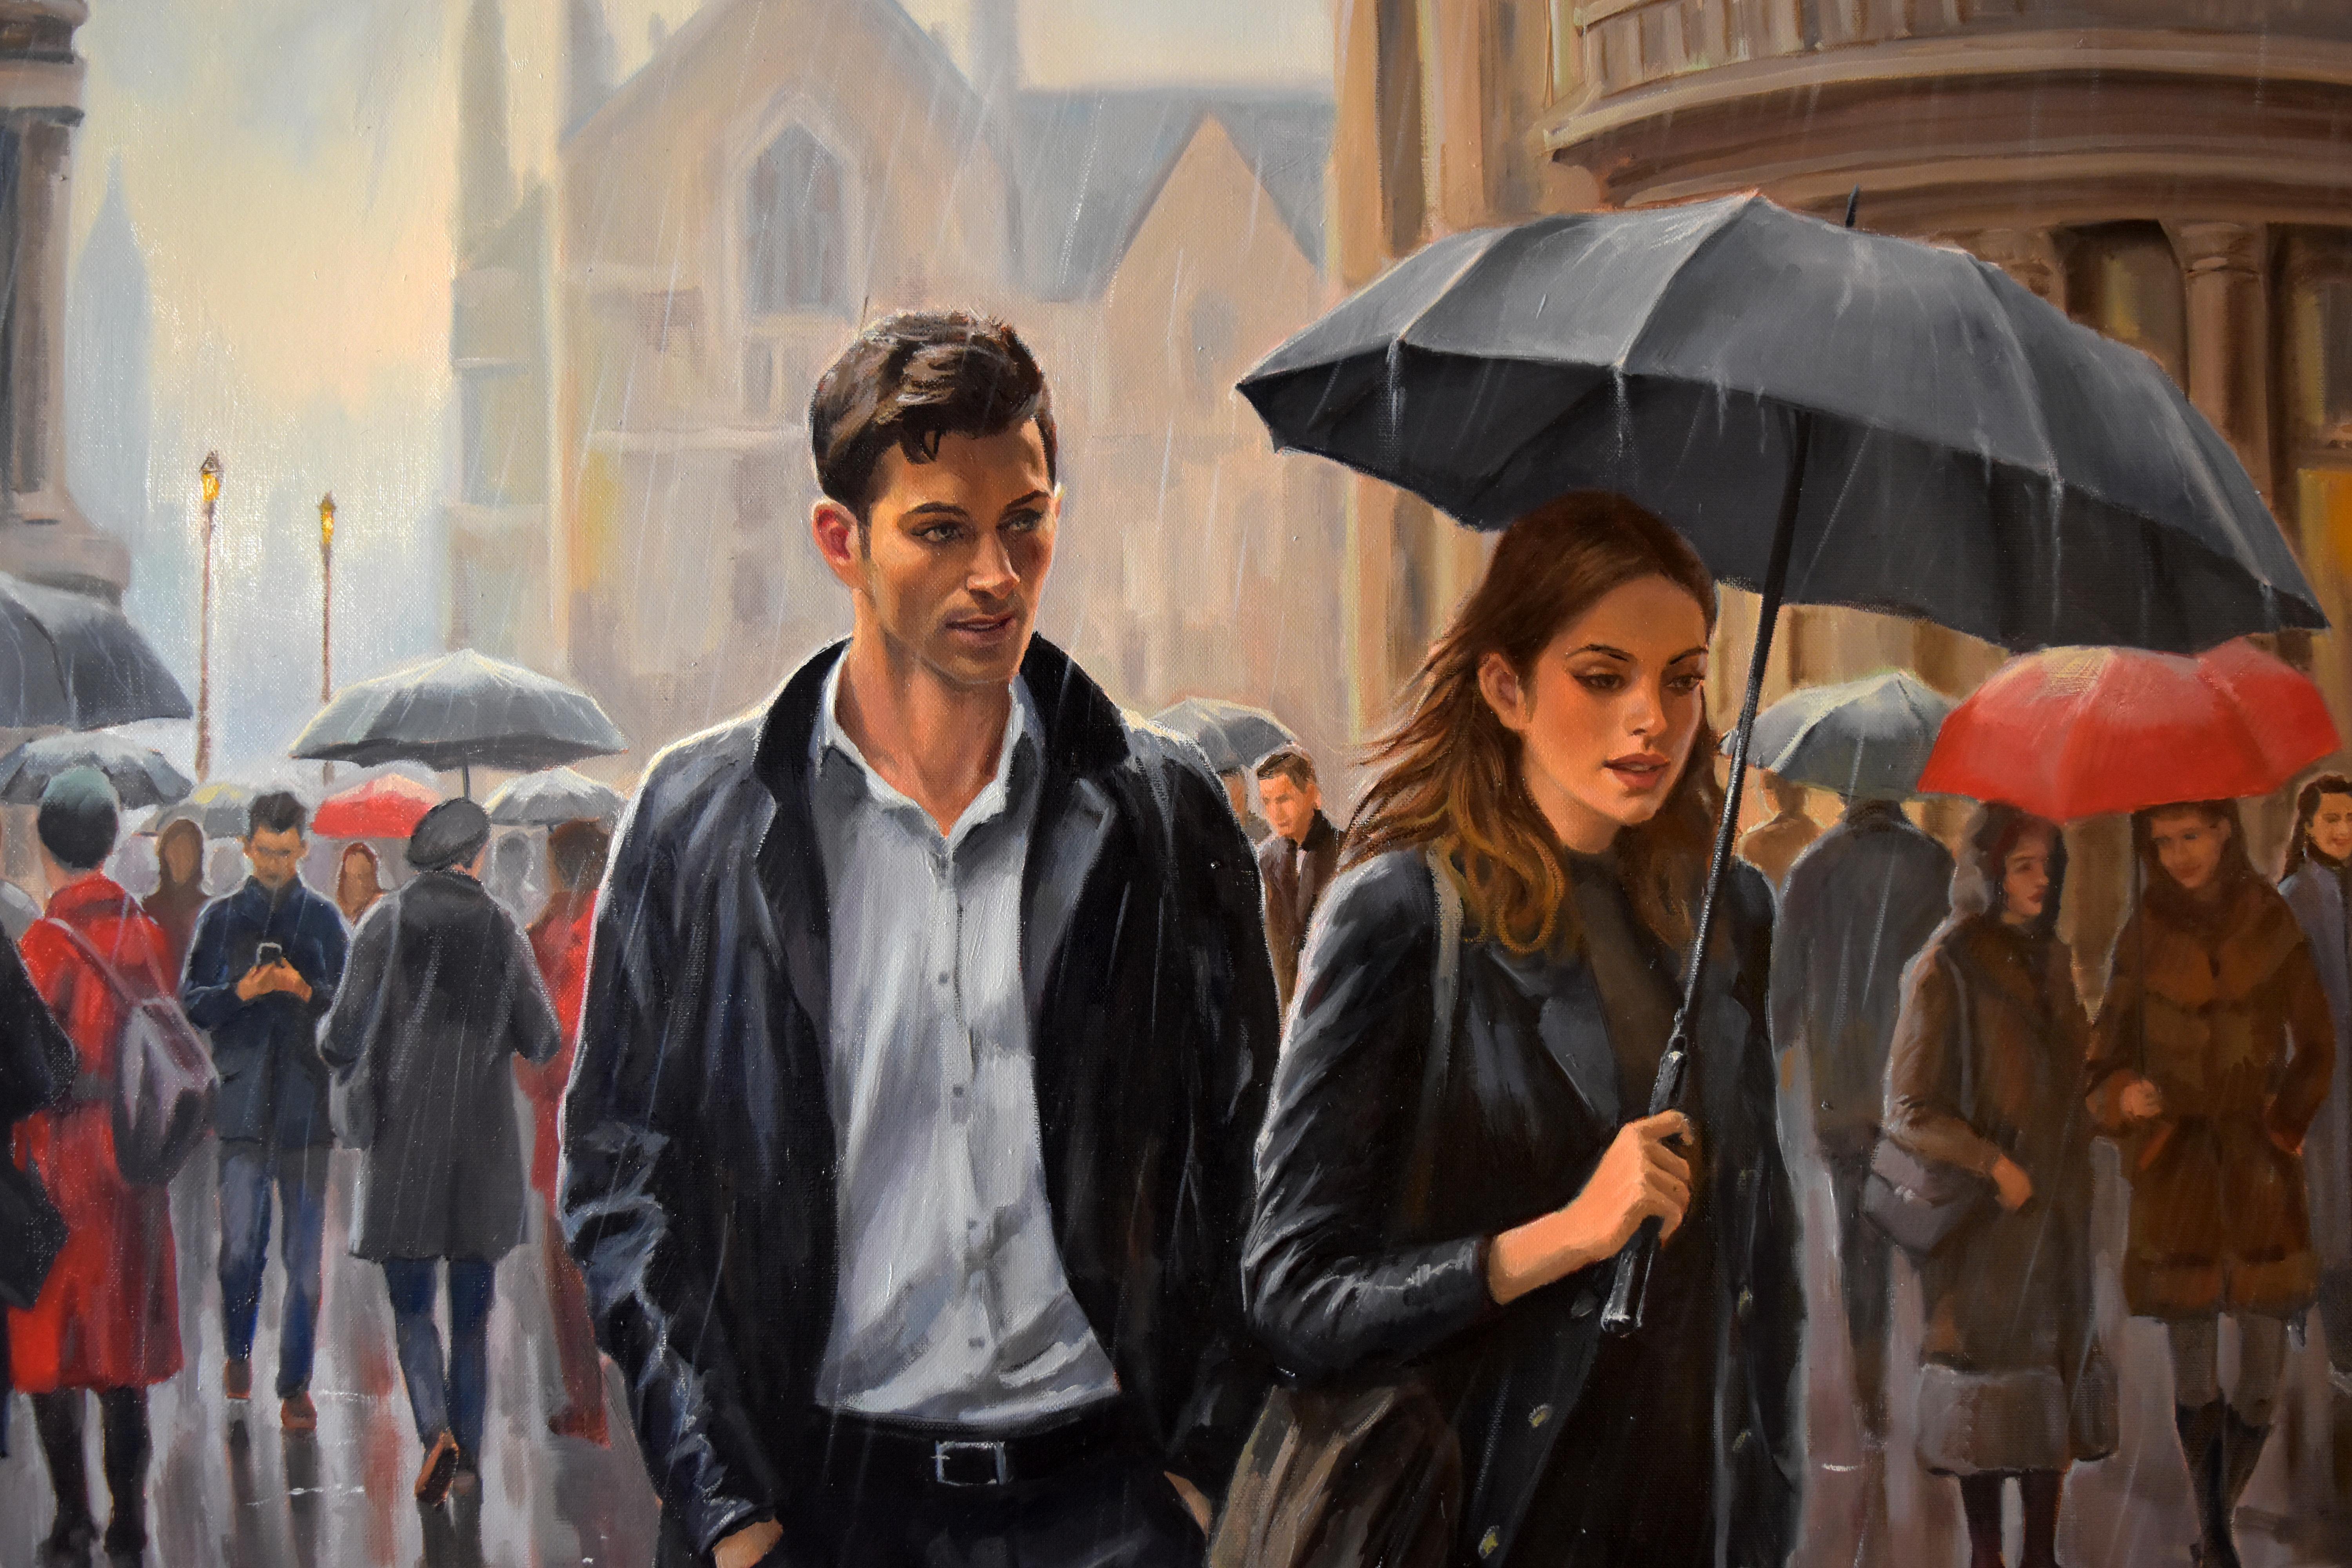 Dating in the rain - Realist Painting by Serghei Ghetiu